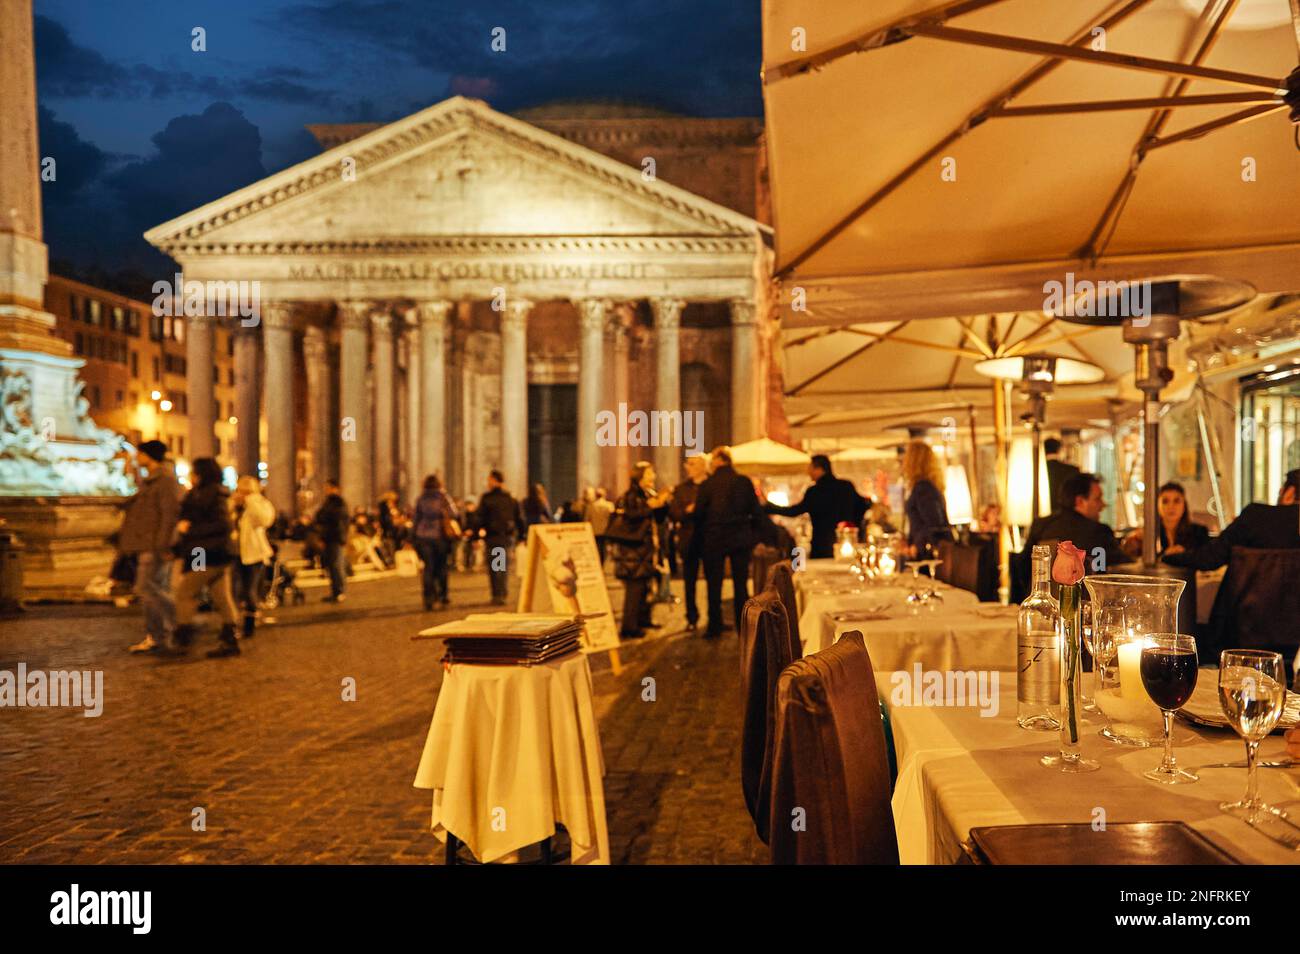 Dinner time in a restaurant at the Pantheon in Rome Italy at sunset Stock Photo